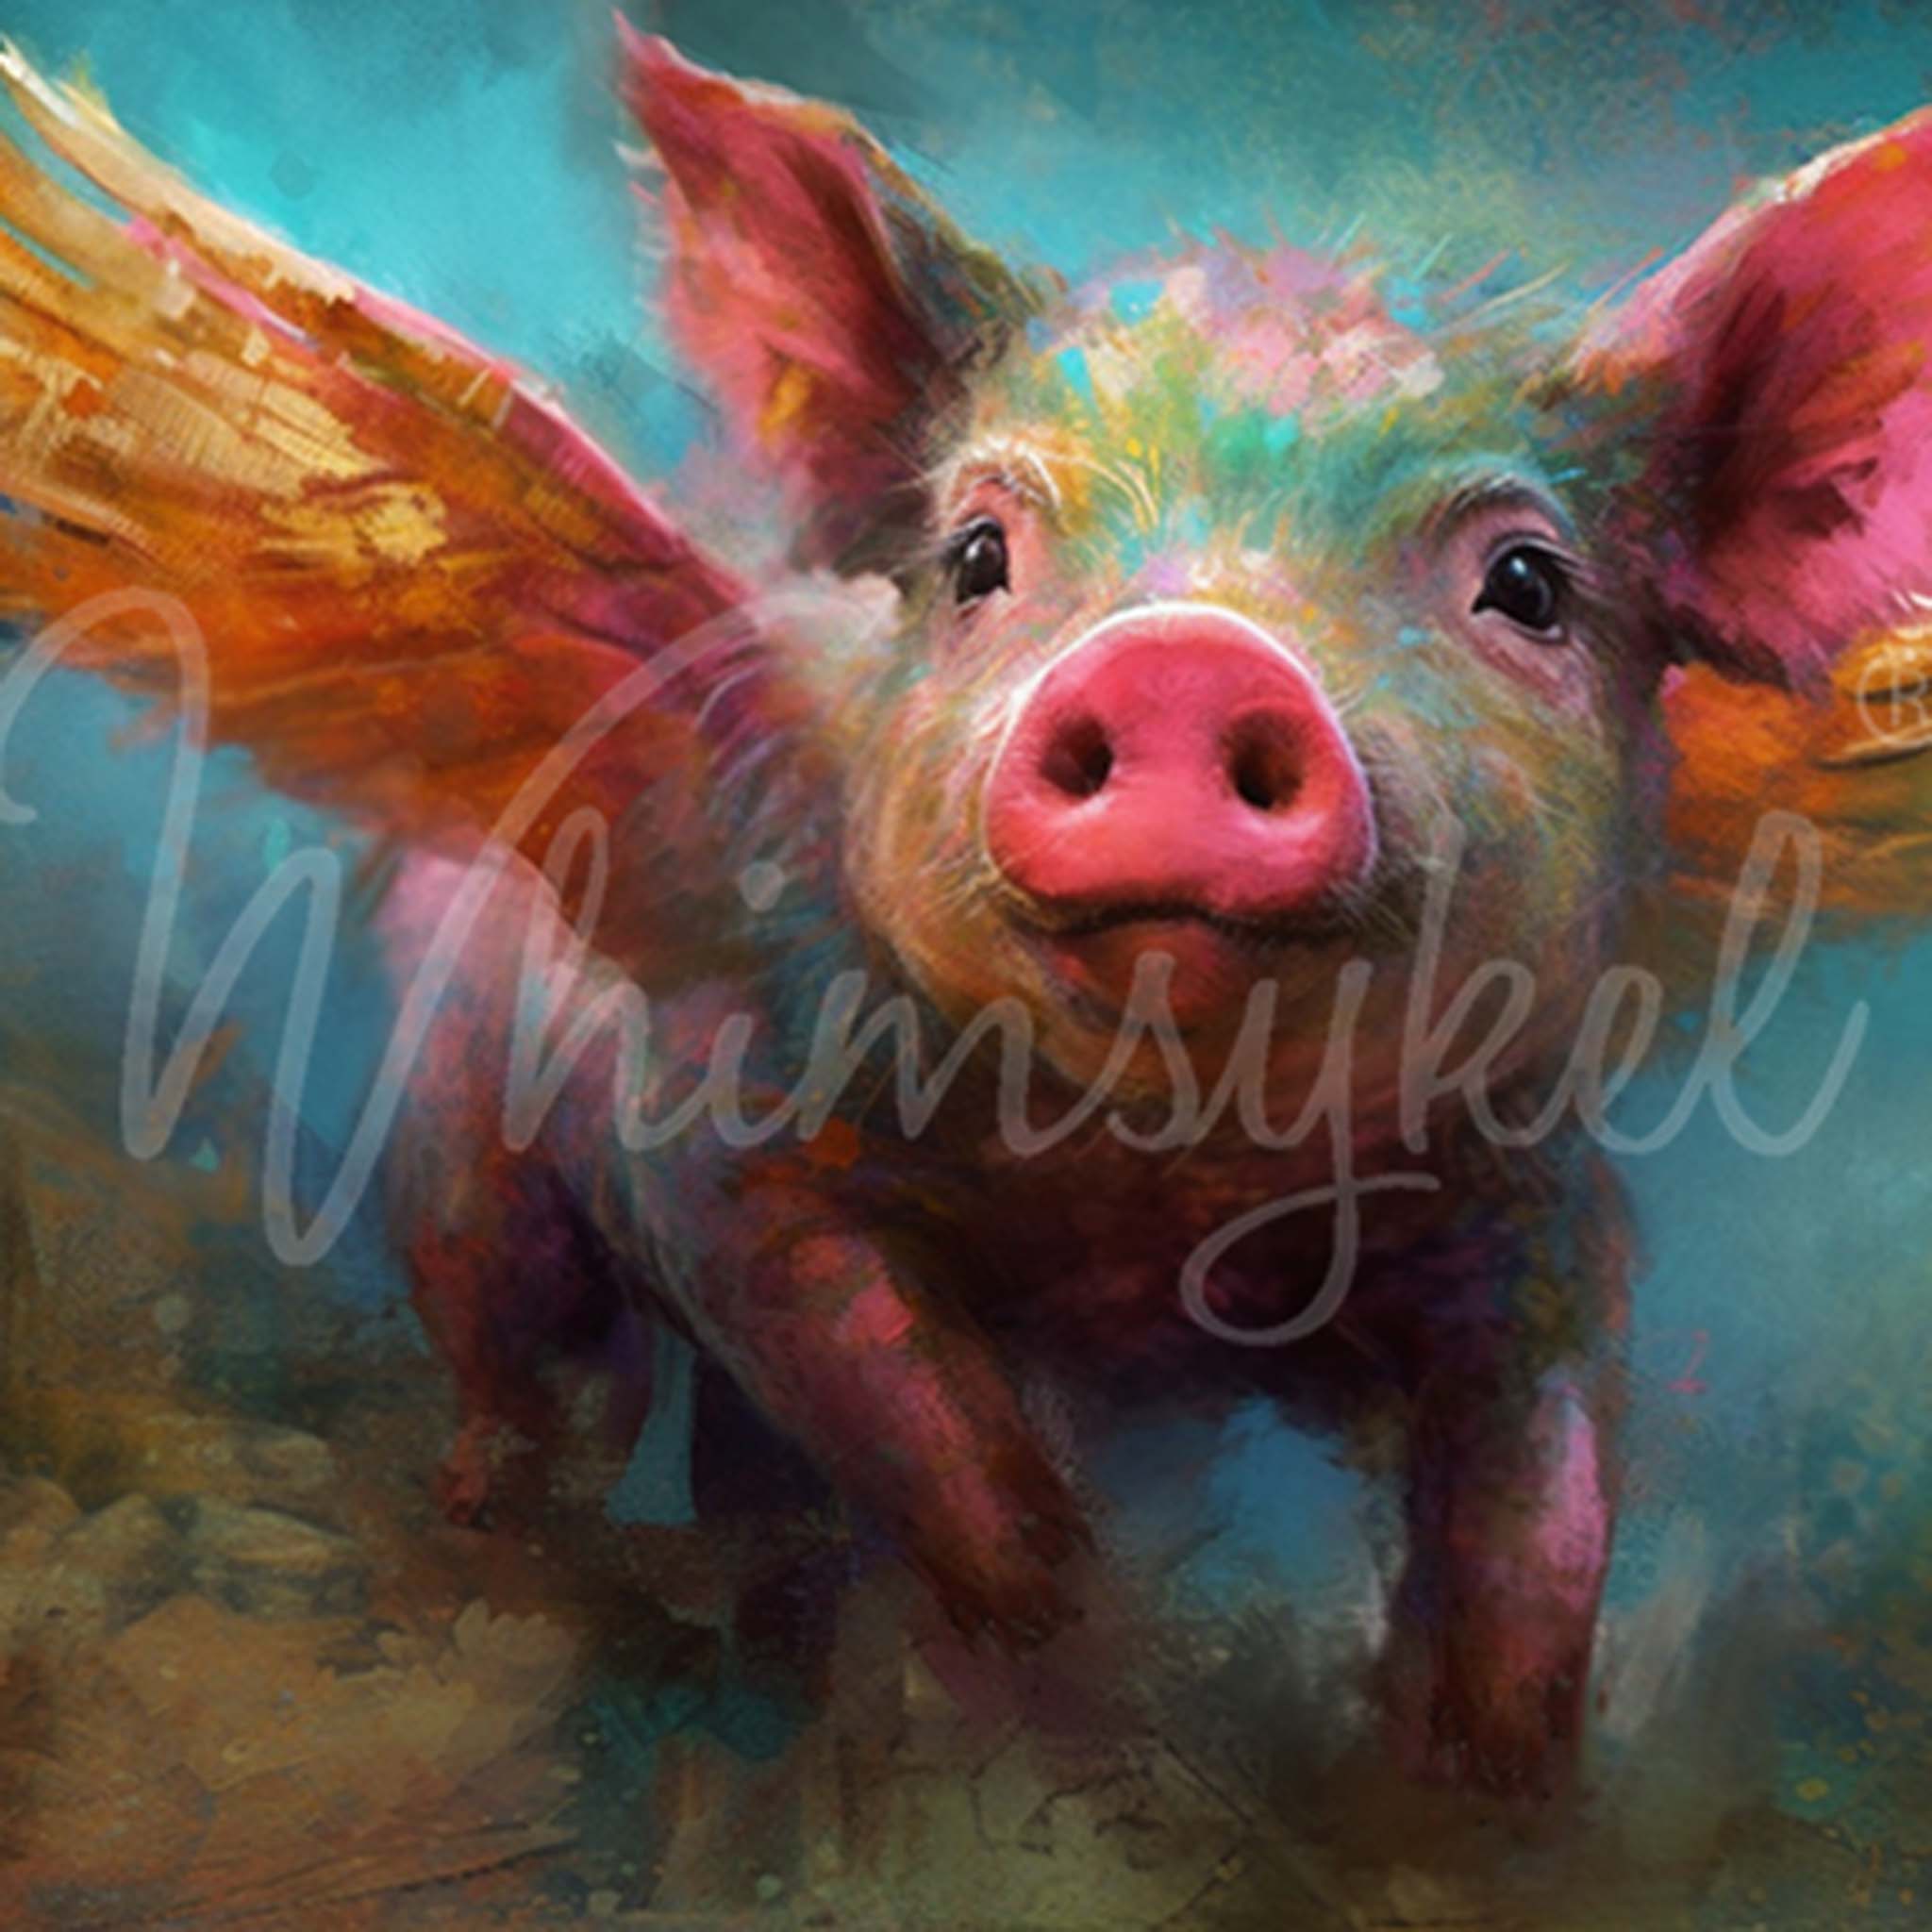 Close-up of a tissue paper design that features a colorful painting of a piglet flying with outstretched wings.